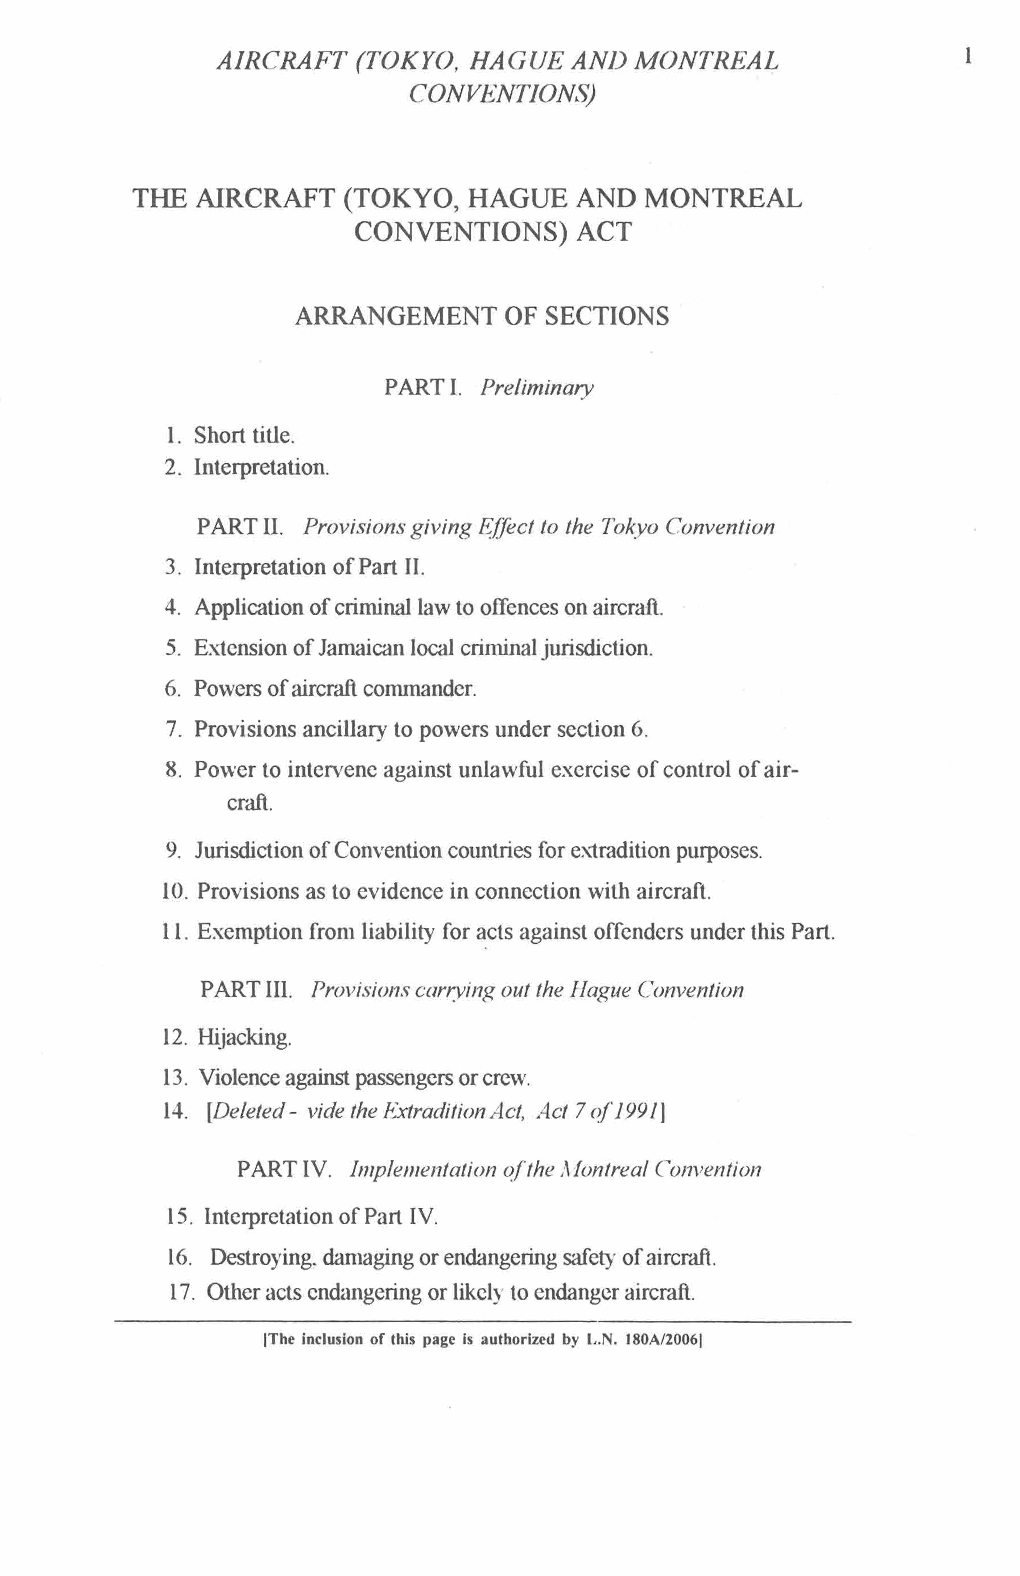 The Aircraft (Tokyo, Hague and Montreal Conventions) Act